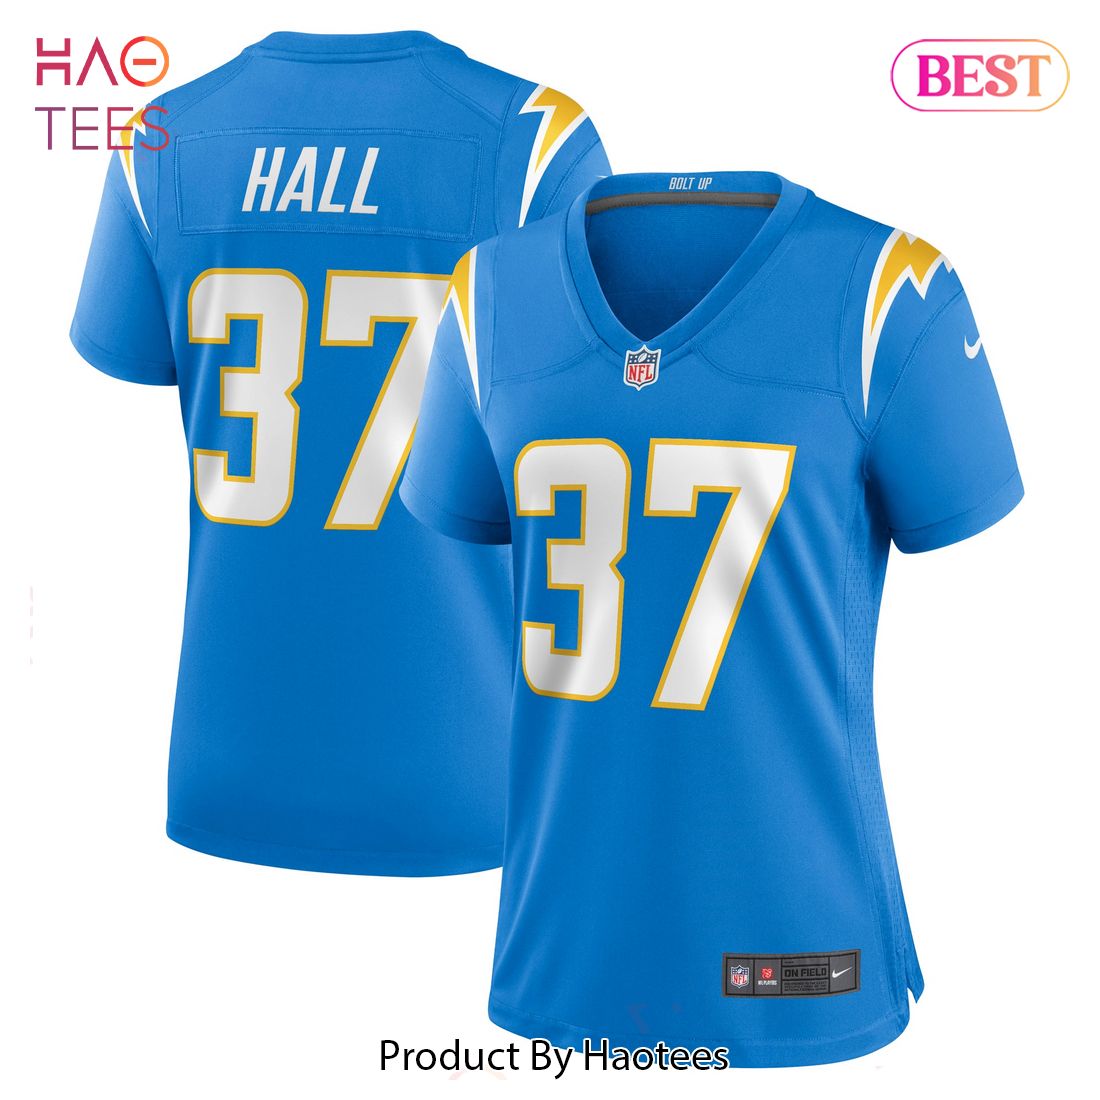 Kemon Hall Los Angeles Chargers Nike Women’s Game Jersey Powder Blue